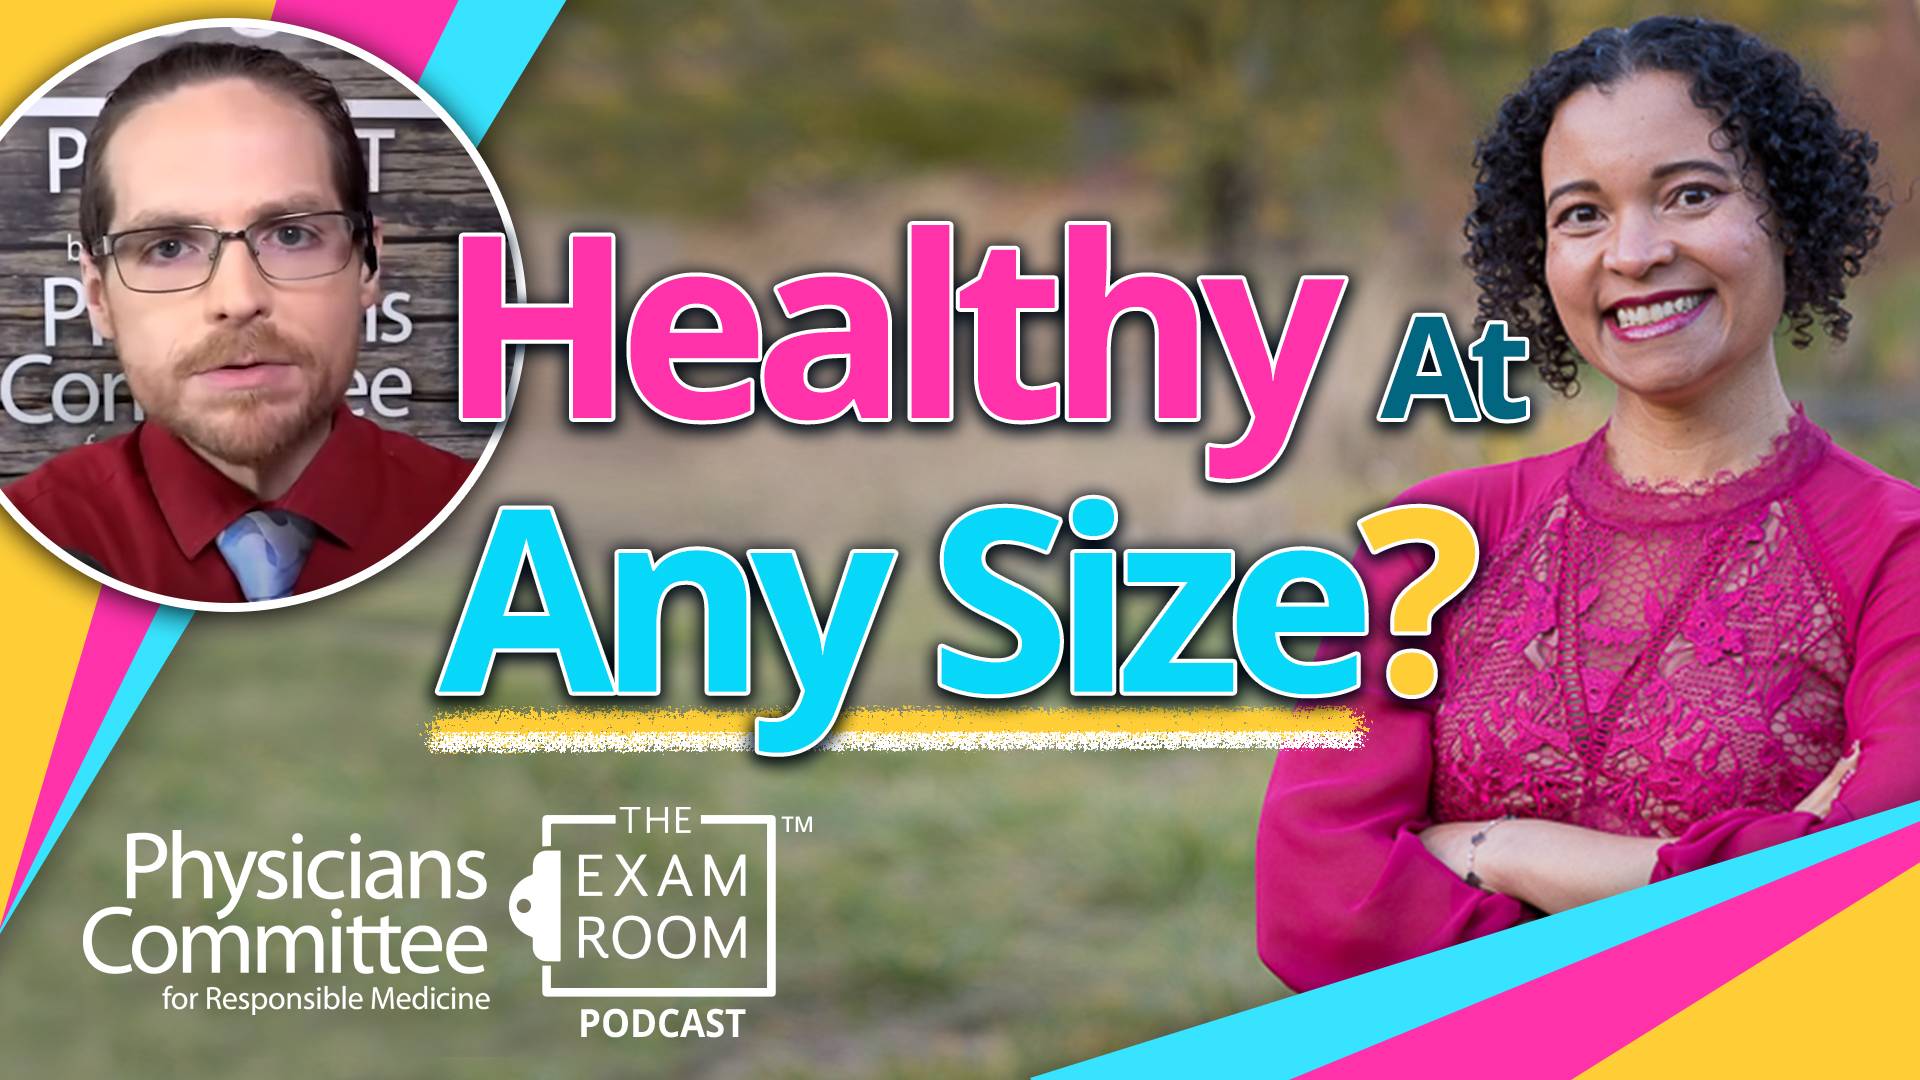 Overweight and Healthy? Examining the “Healthy at Every Size” Movement